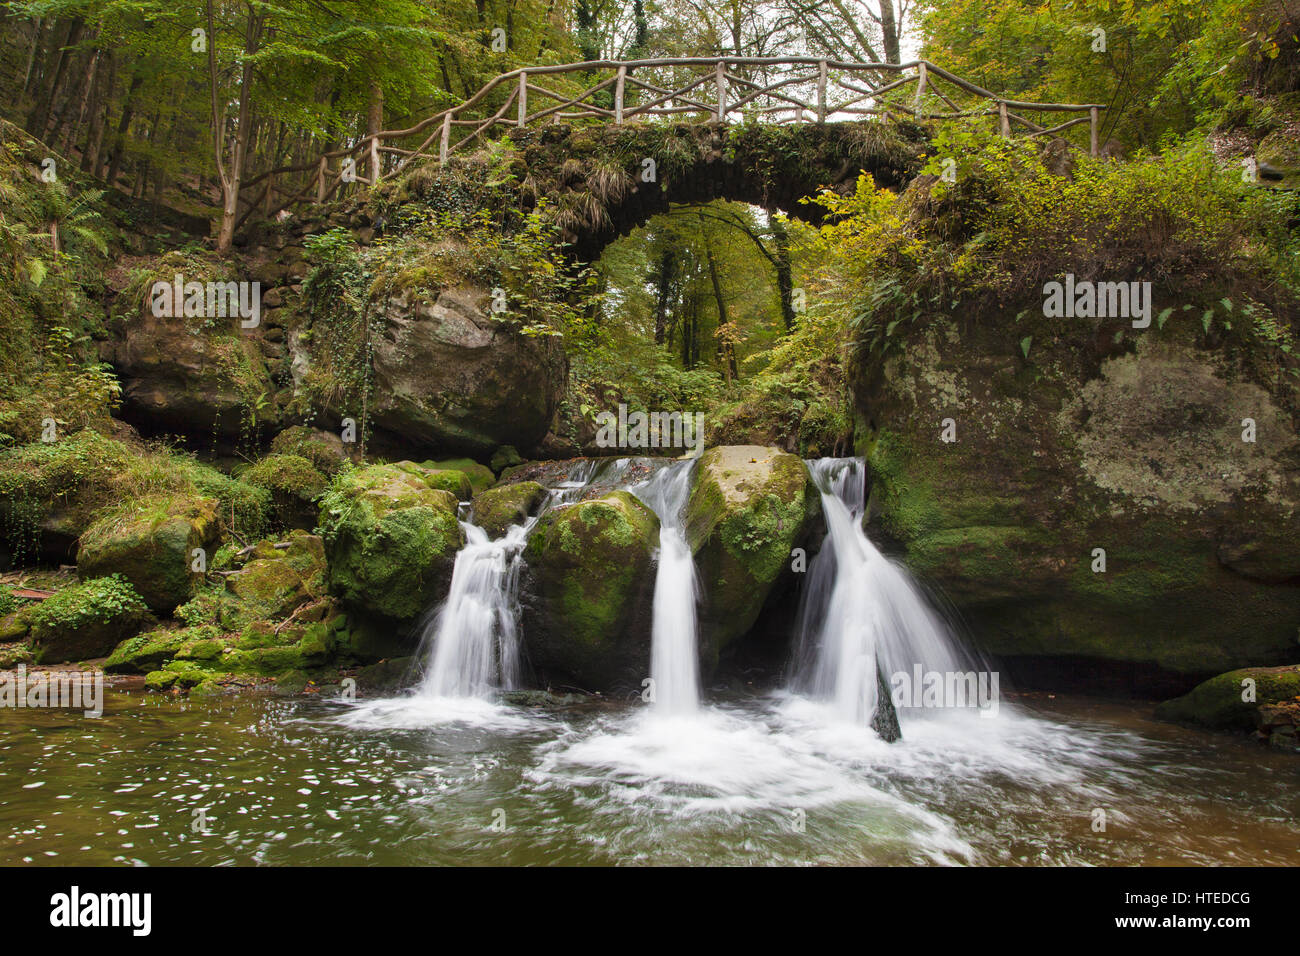 Stone Bridge over the Schiessentumpel Waterfall, part of the Mullerthal Trail, Luxembourg. Stock Photo